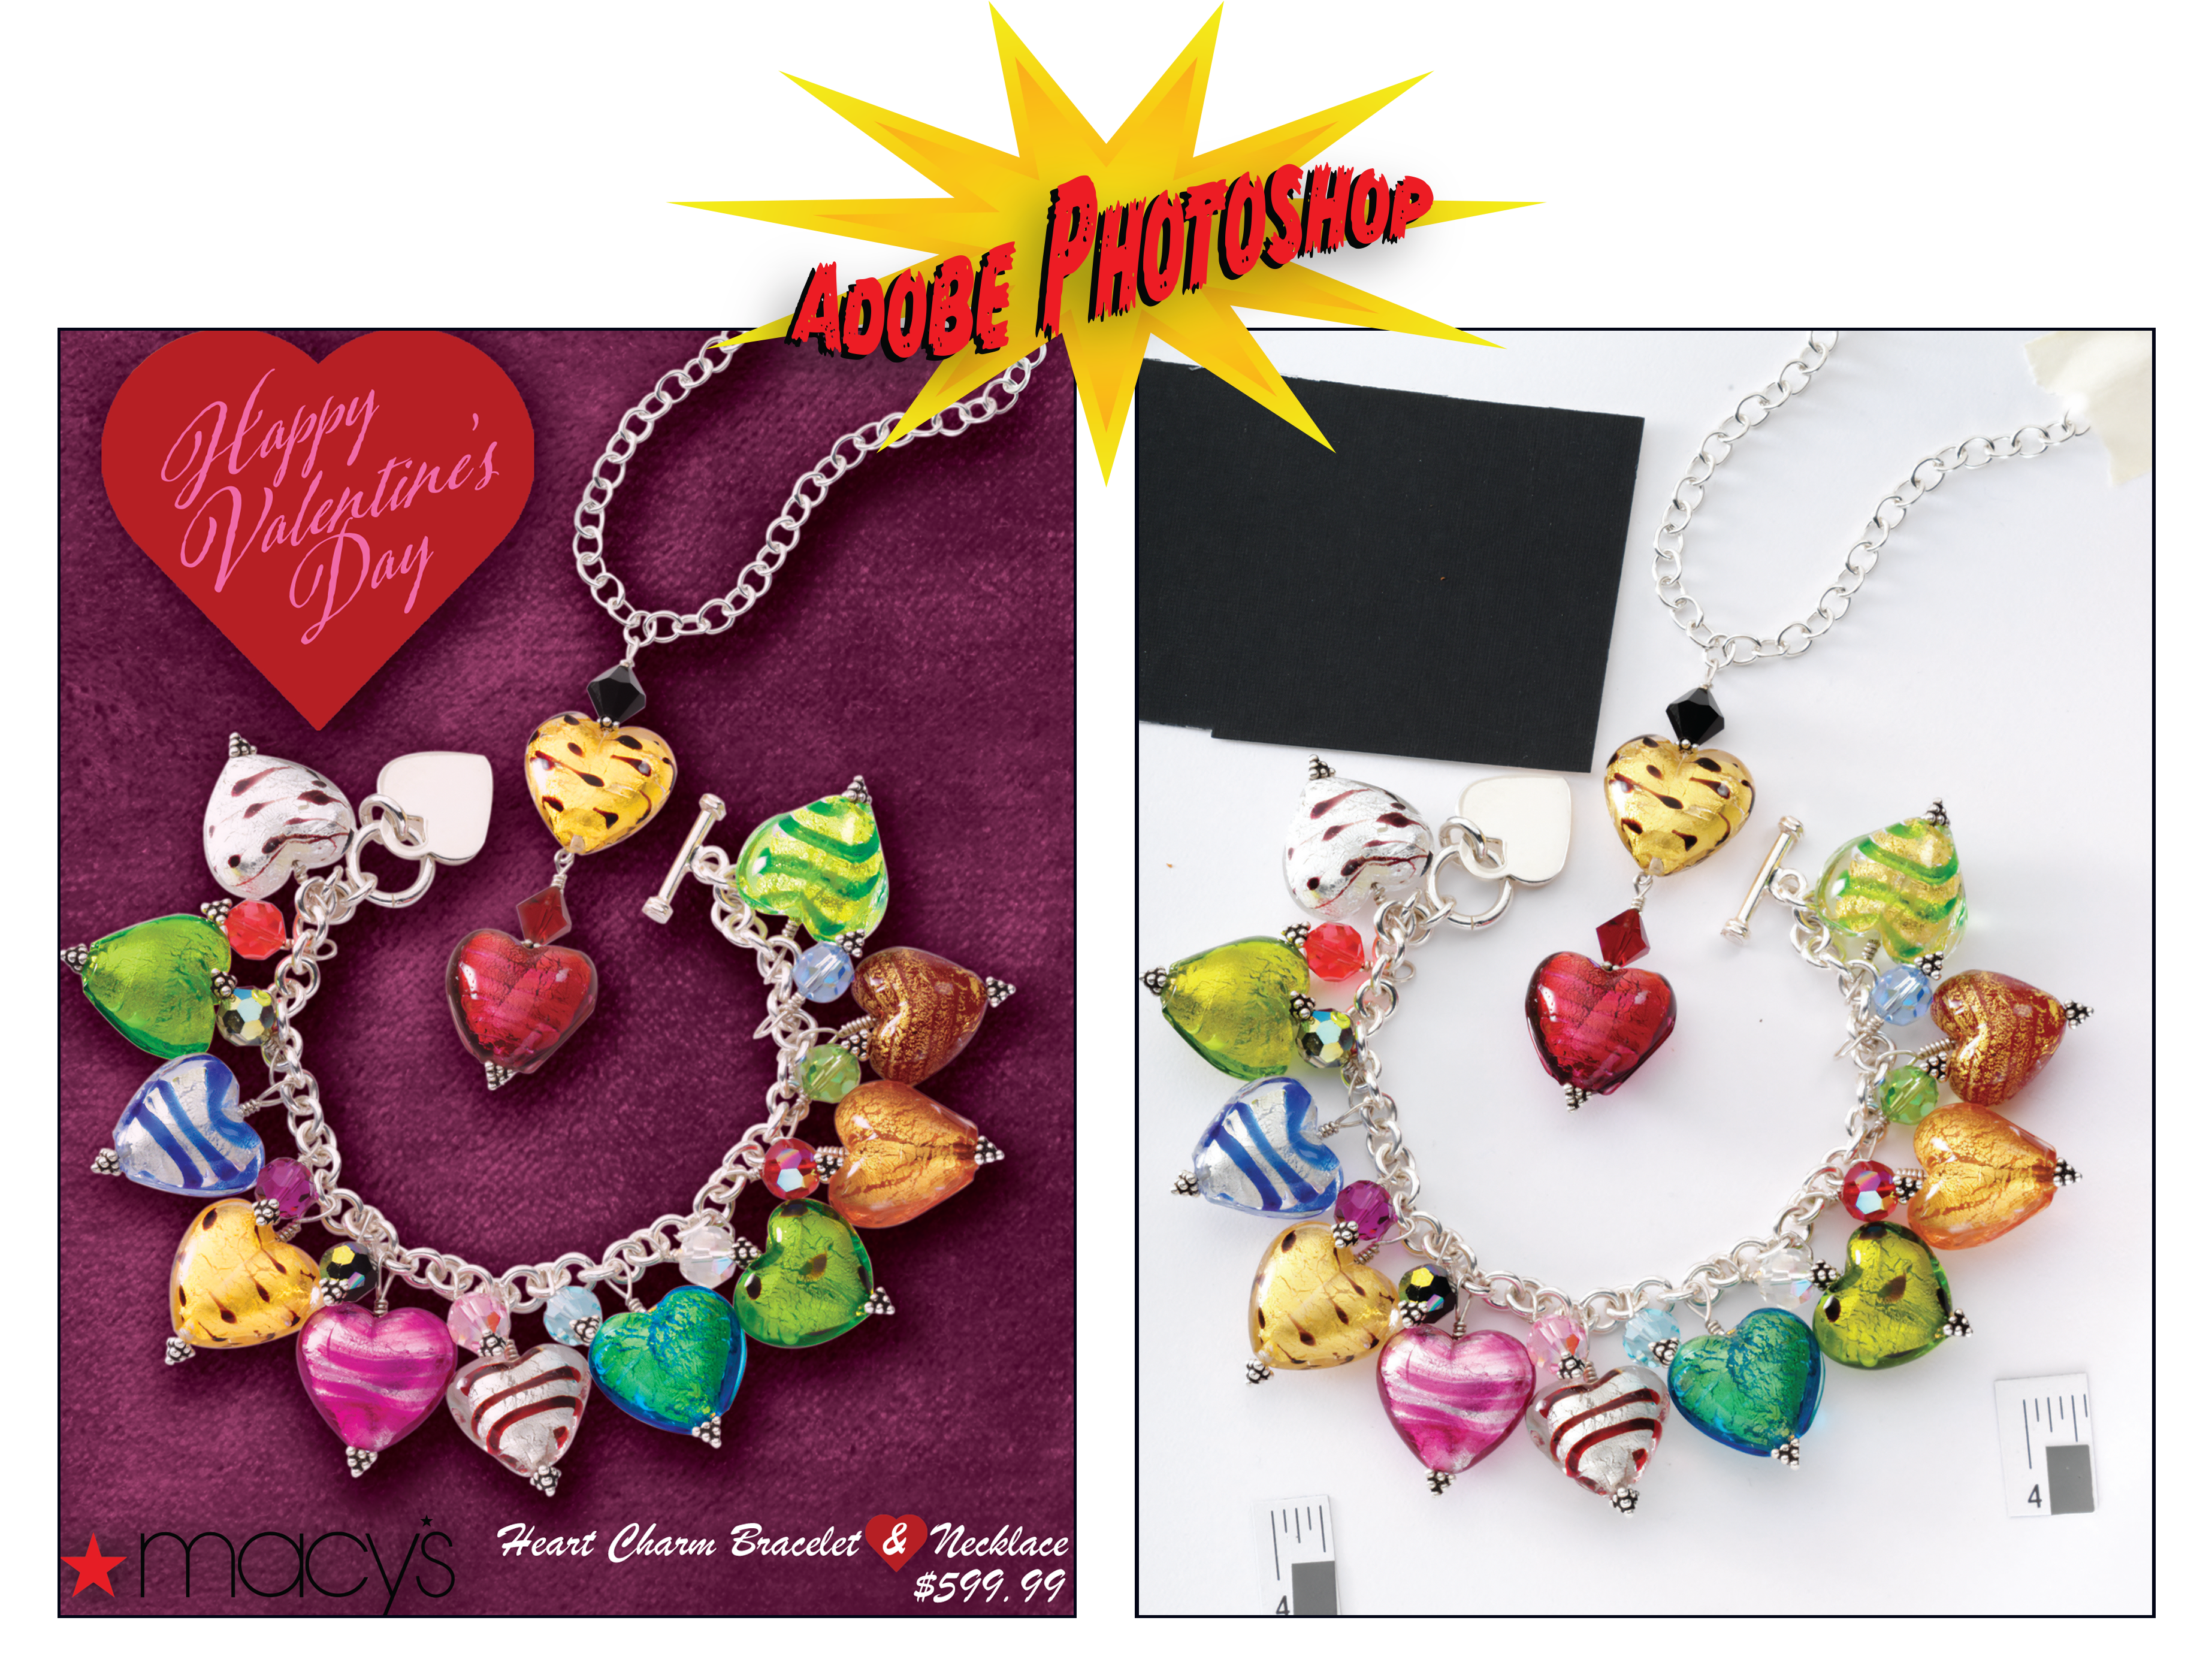 Advertisment for Macy's Valentines Day necklace and braclet. Created with Adobe Photoshop.